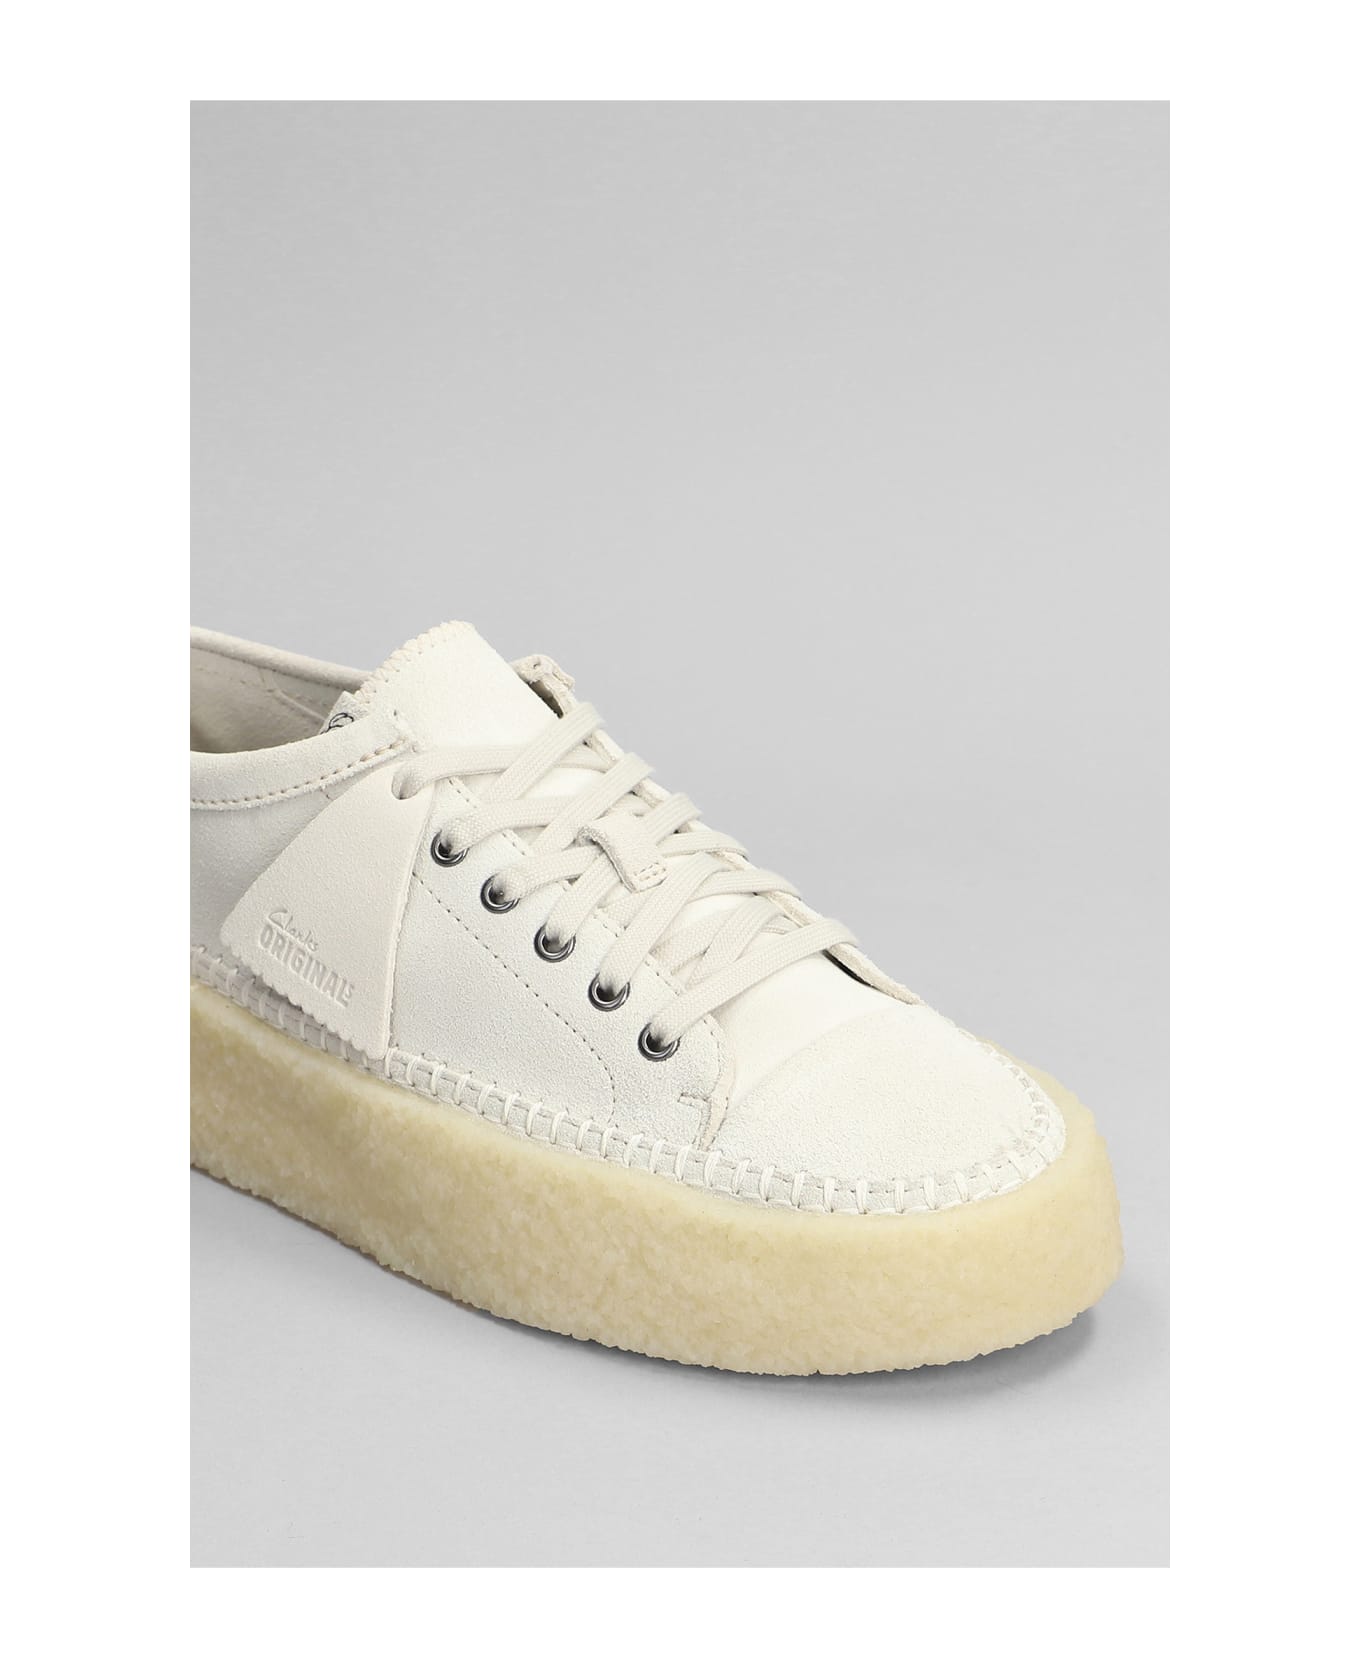 Clarks Caravan Low Lace Up Shoes In White Suede - white